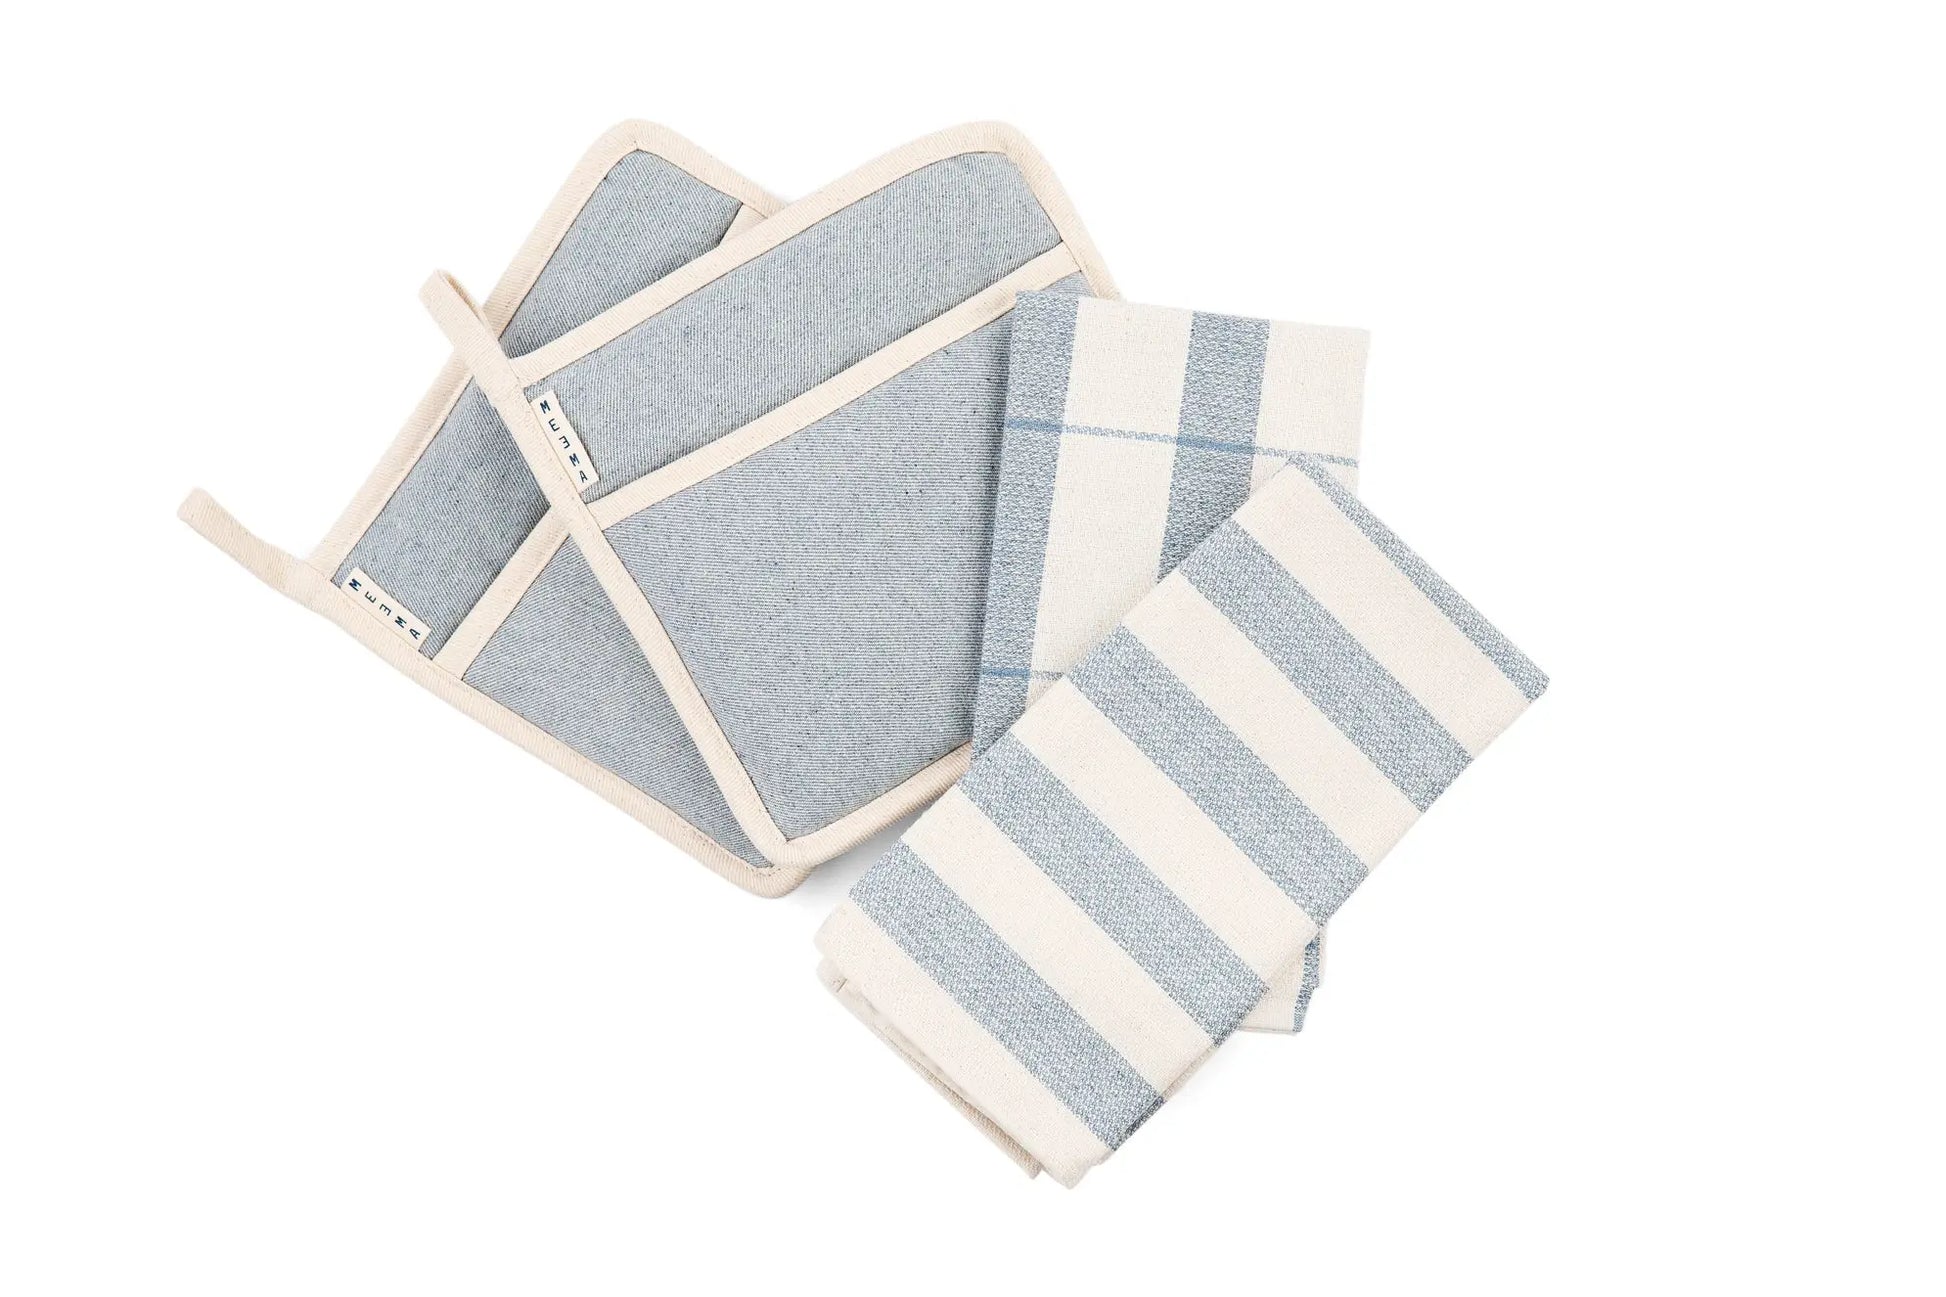 Dish Towels for Kitchen with Pot Holder Set, 4 Pieces-4